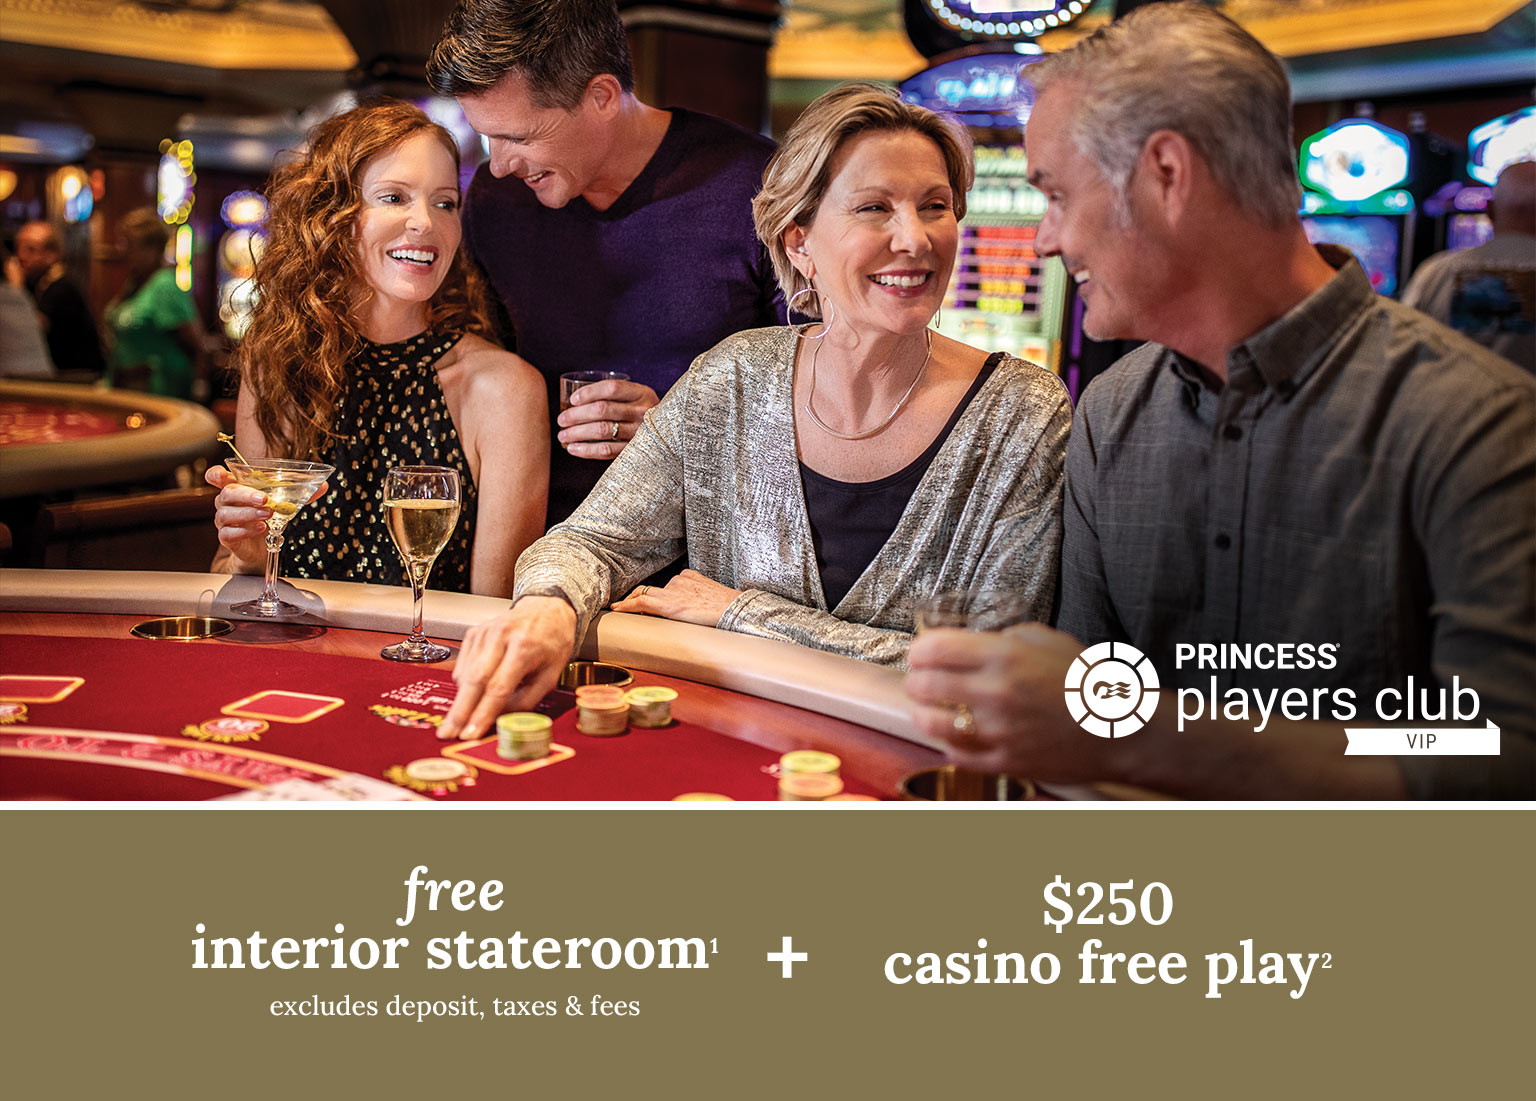 Free interior stateroom + $250 casino free play. Click here to book.